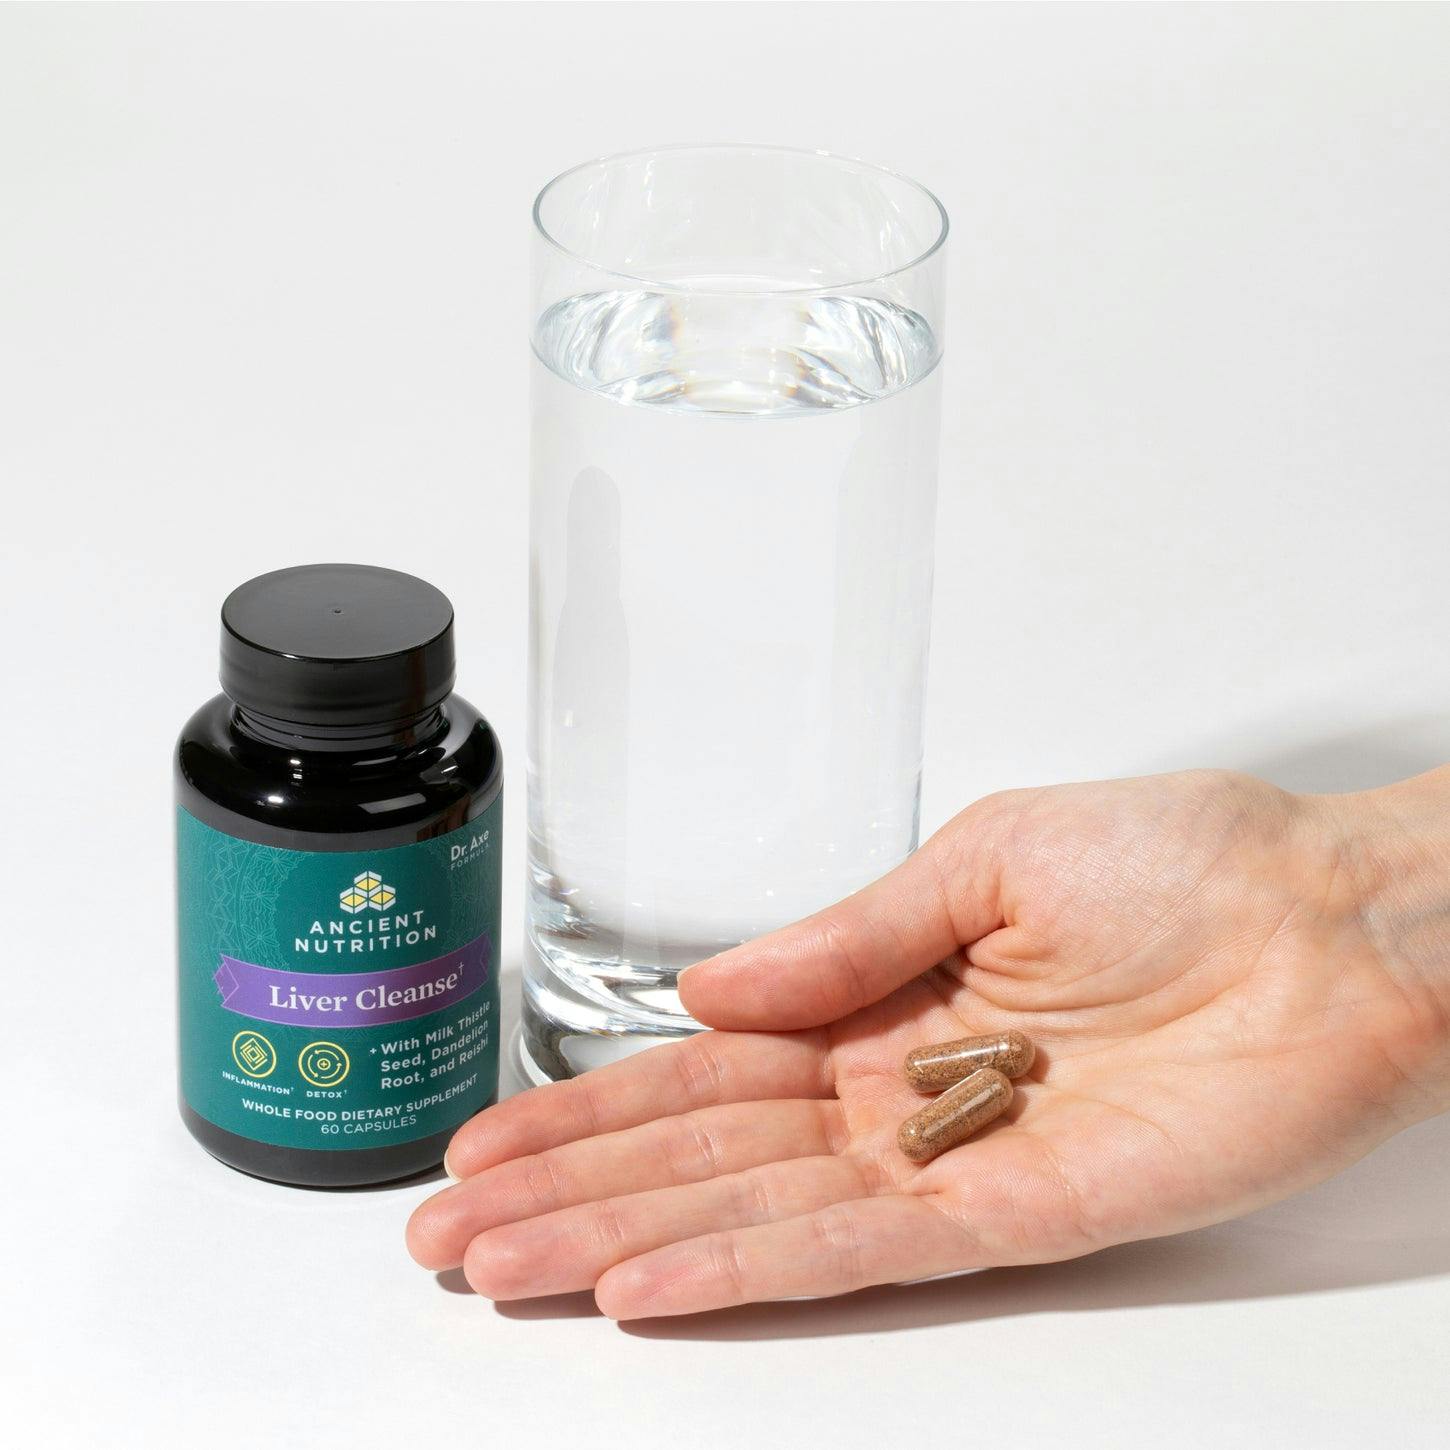 liver cleanse capsule in the palm of persons hand